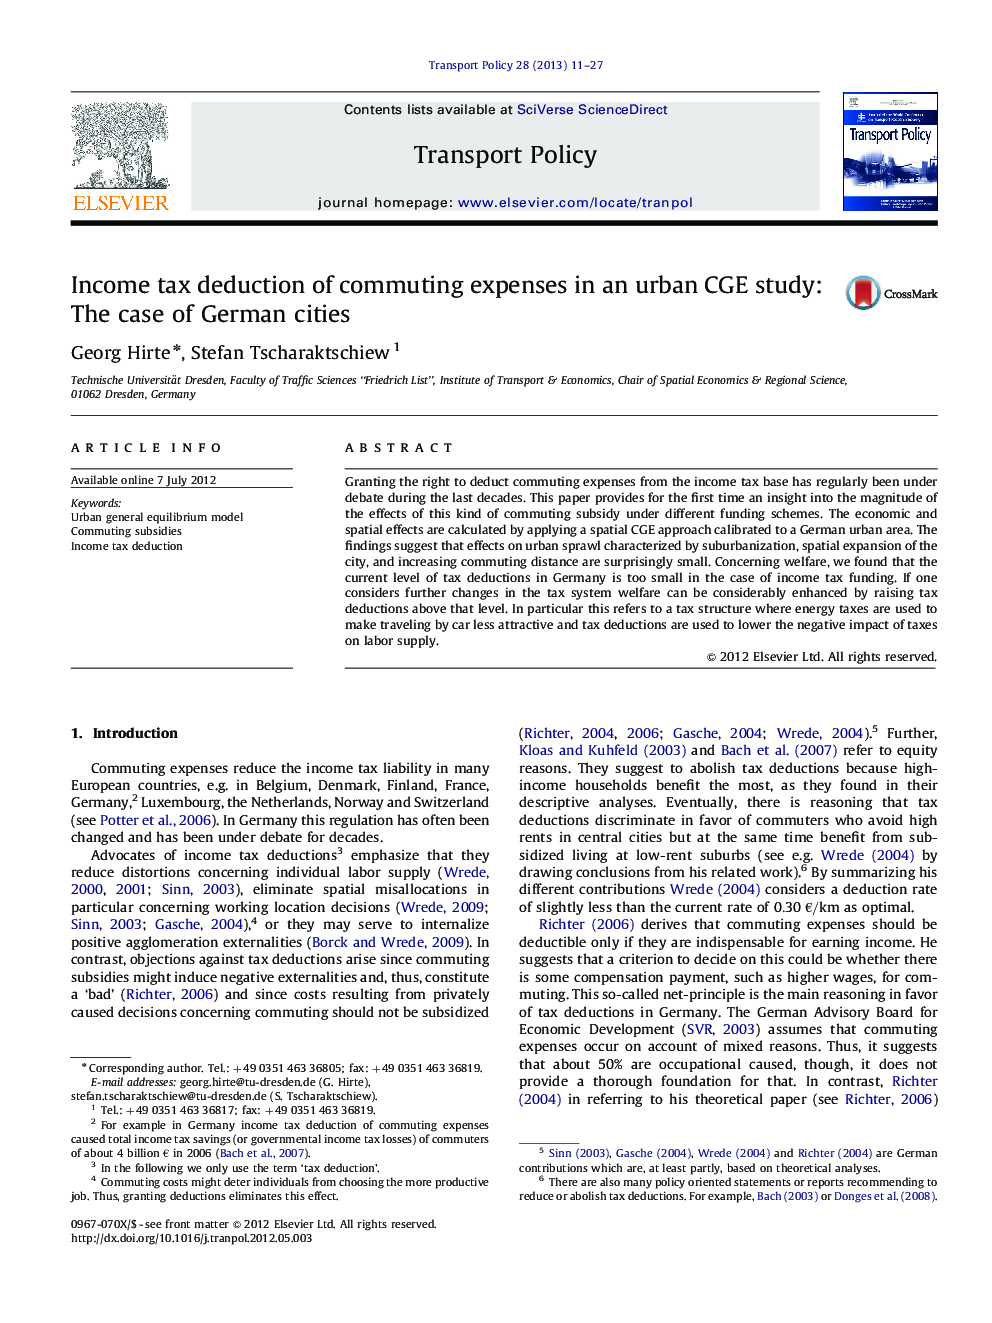 Income tax deduction of commuting expenses in an urban CGE study: The case of German cities